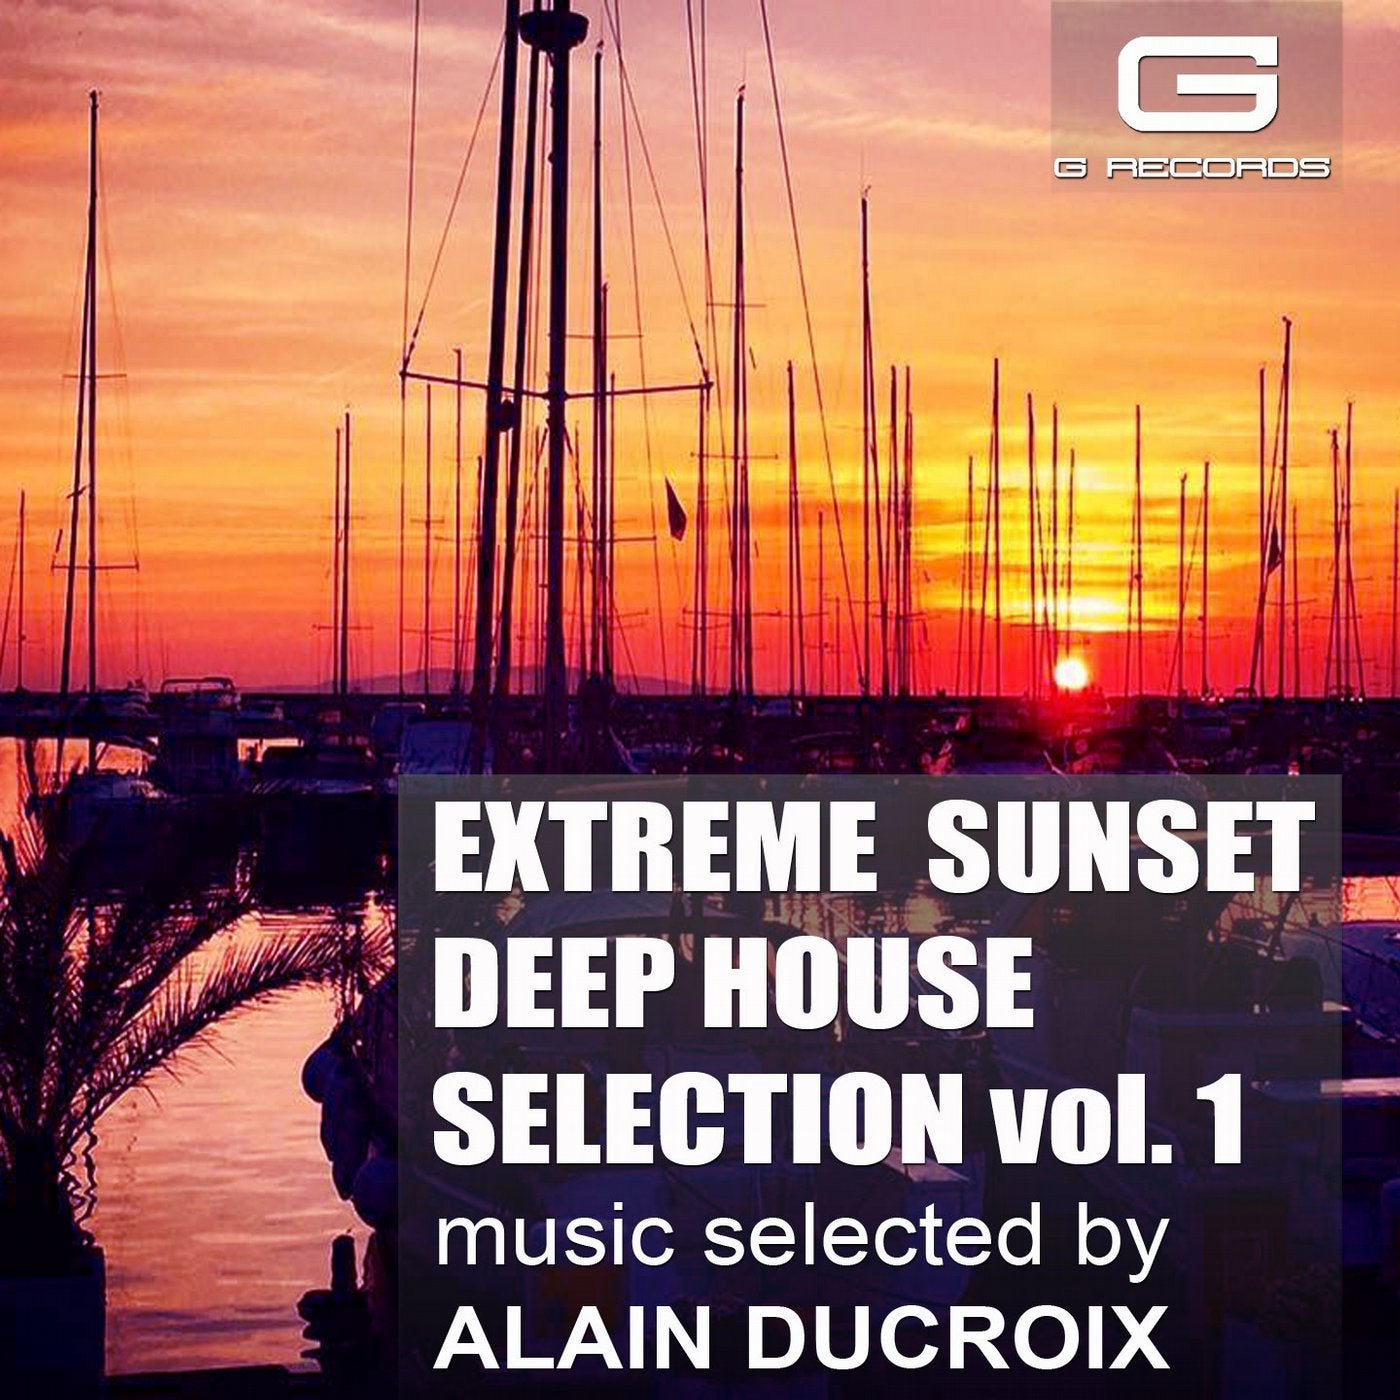 Extreme Sunset Deep House Selection, Vol. 1 (Music Selected by Alain Ducroix)